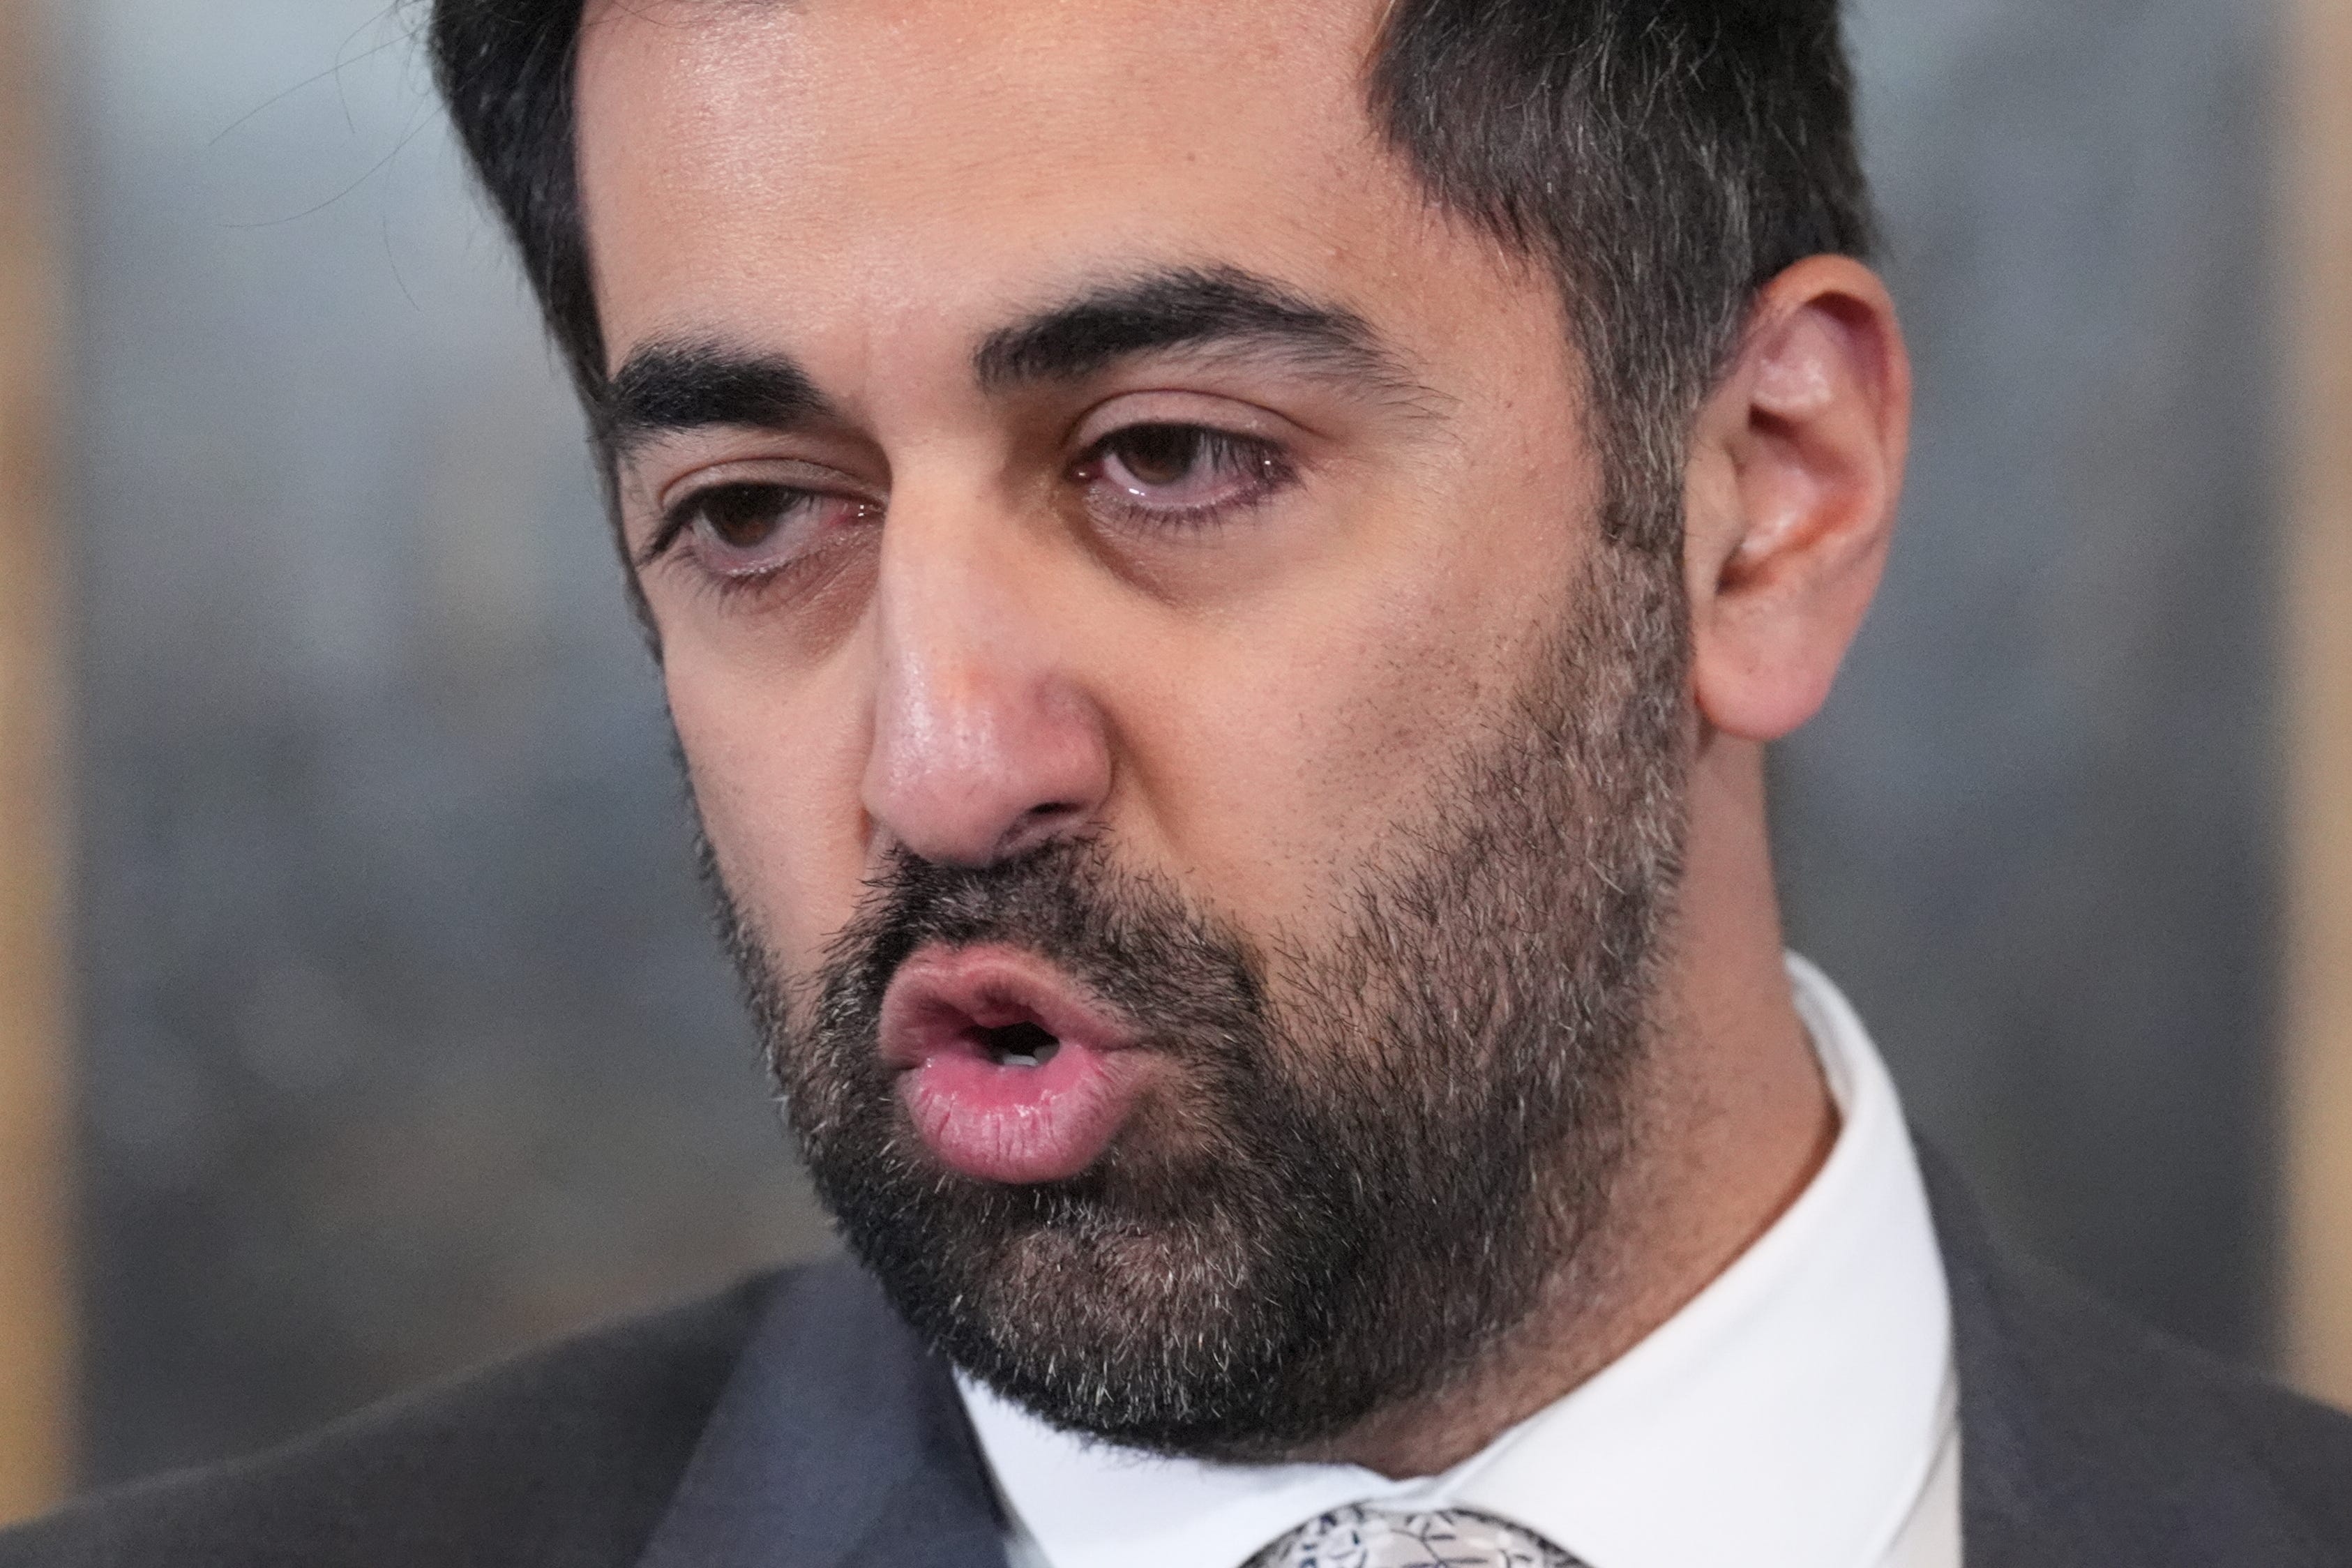 Humza Yousaf has announced he is to step down as First Minister of Scotland (Andrew Milligan/PA)